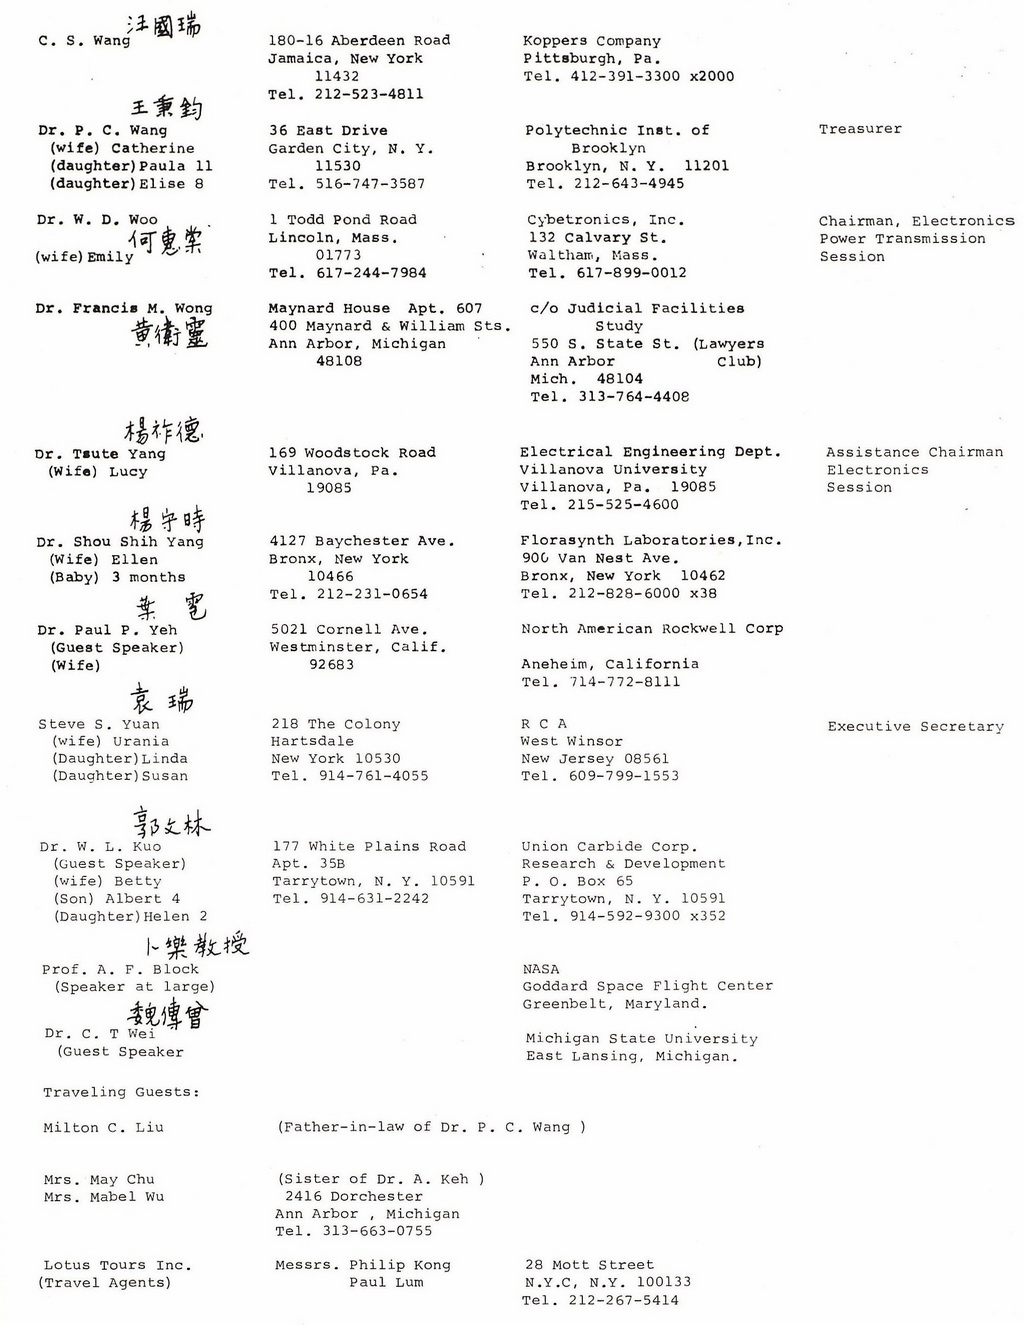 (2/2)Seminar on Modern Engineering and Technology 1968 CIE-NY List of speakers